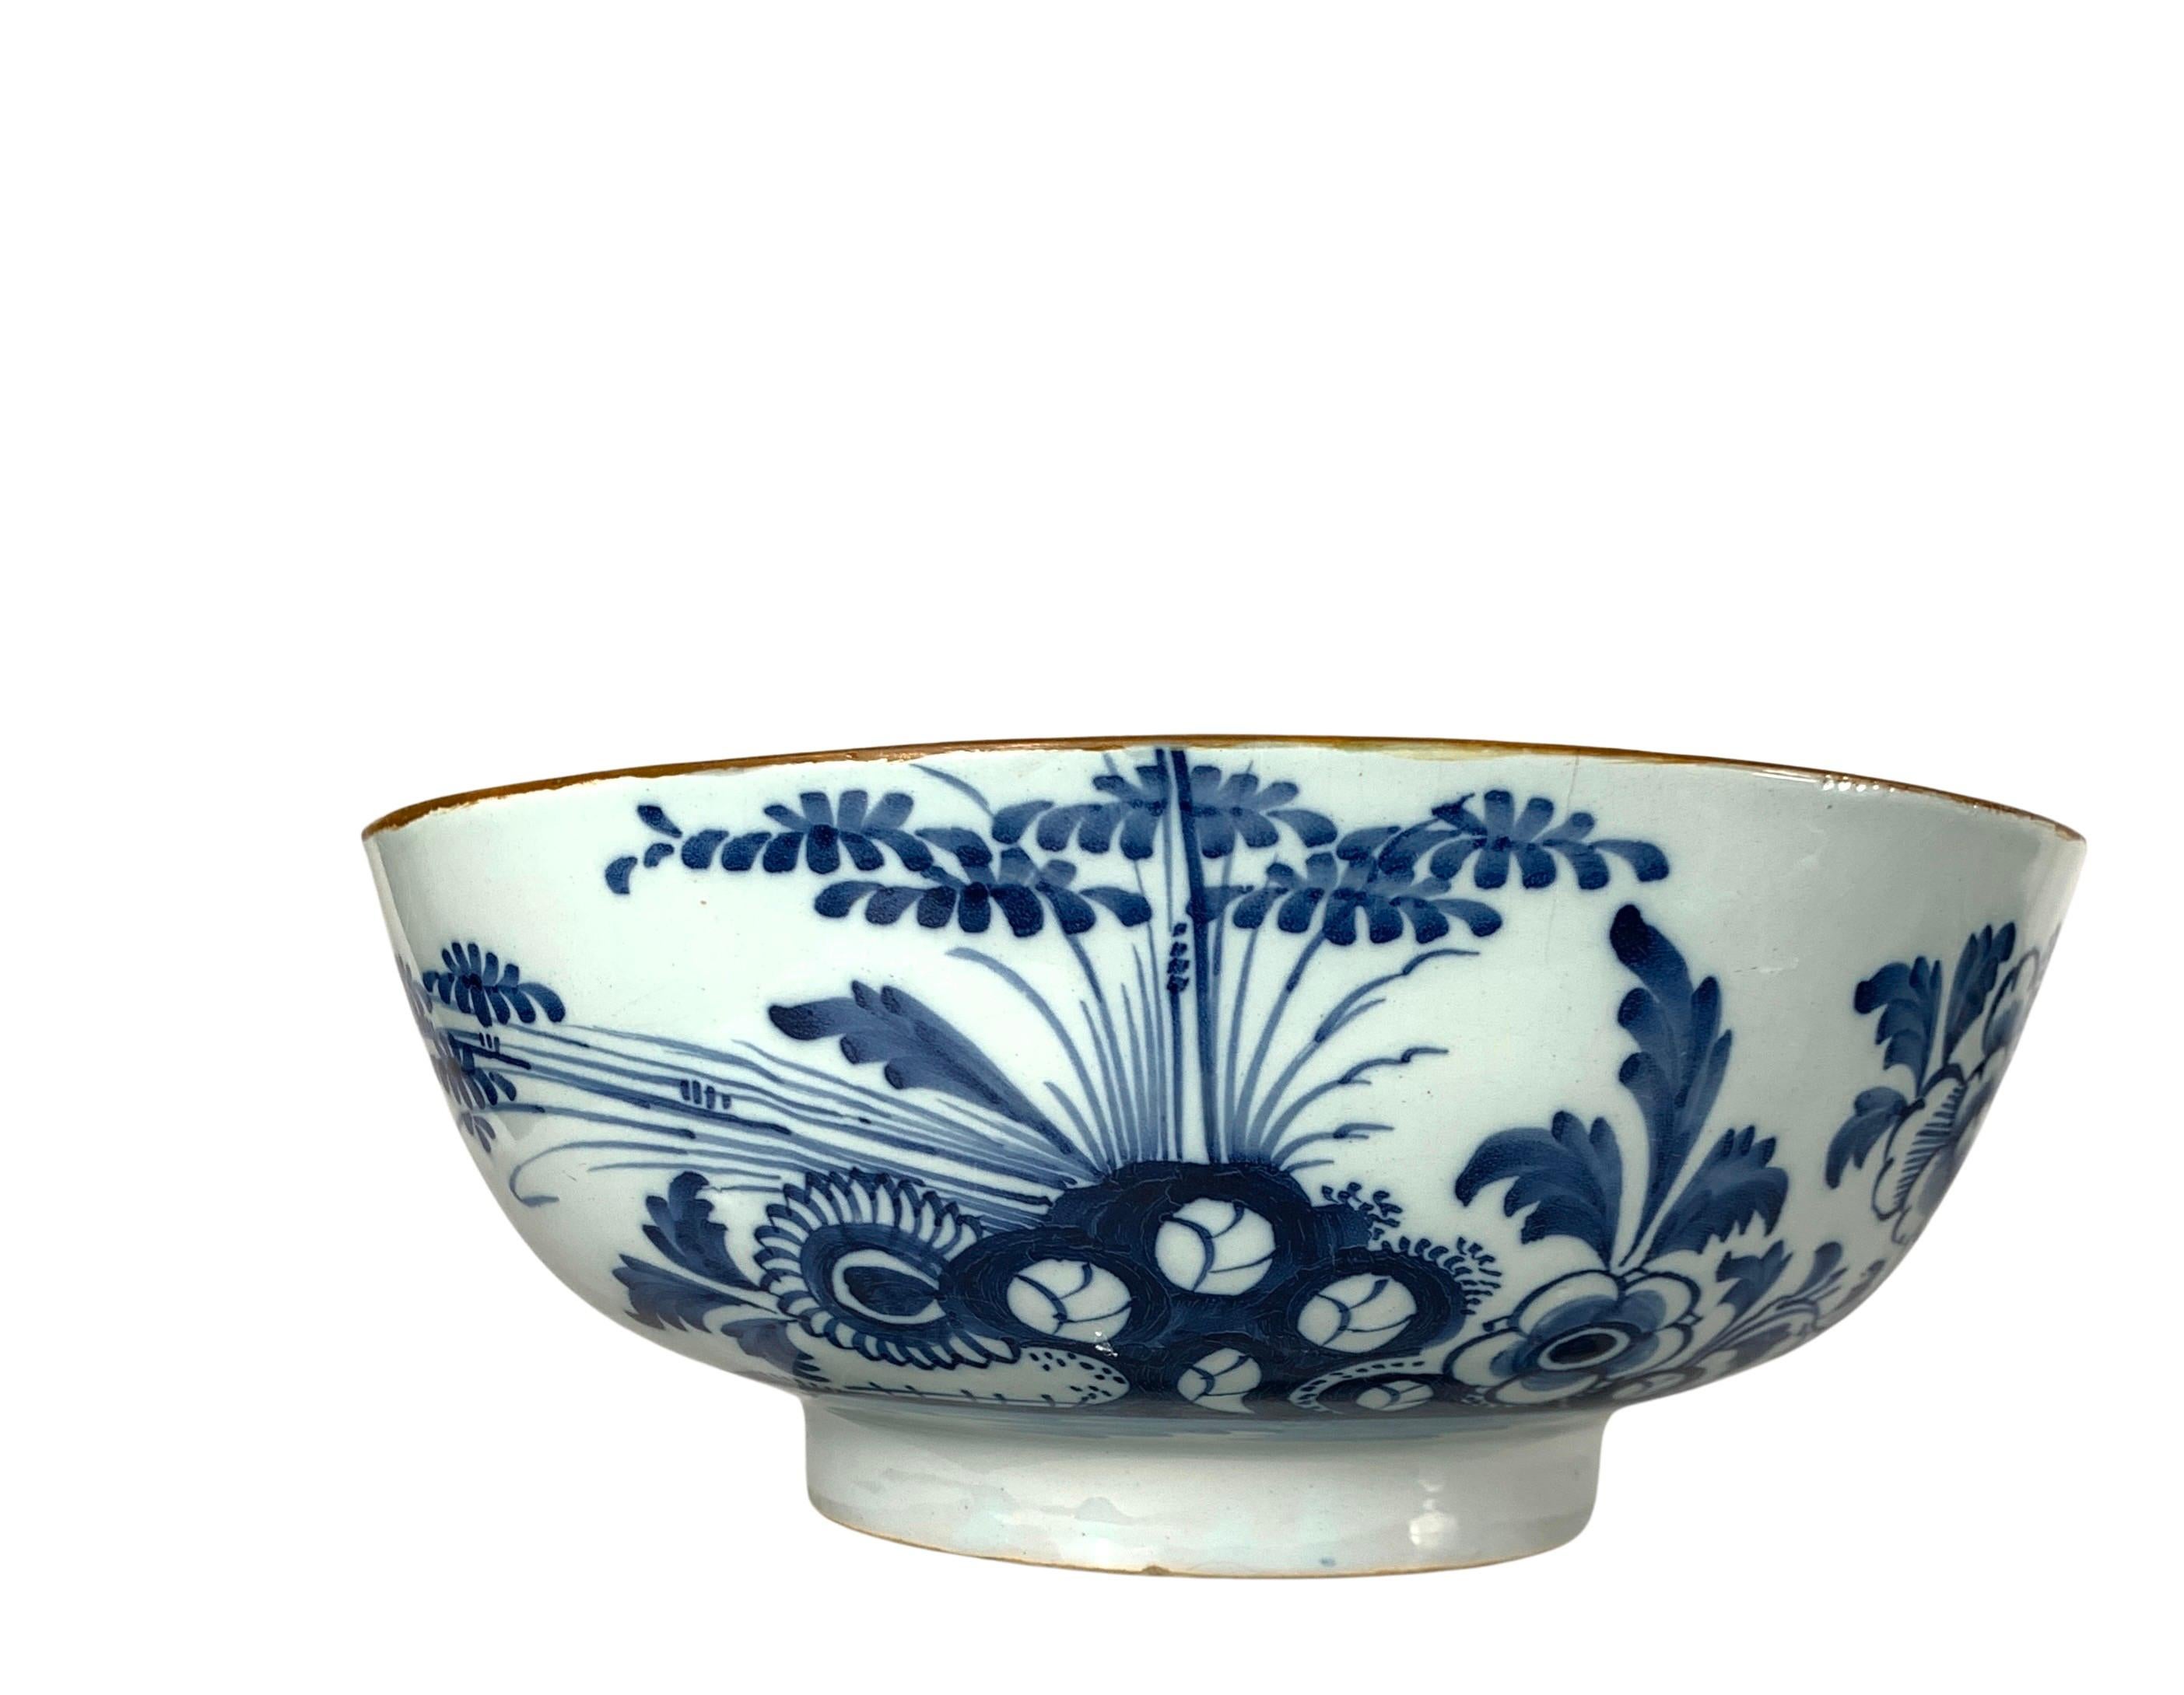 This is a blue and white Dutch Delft punch bowl (10.25